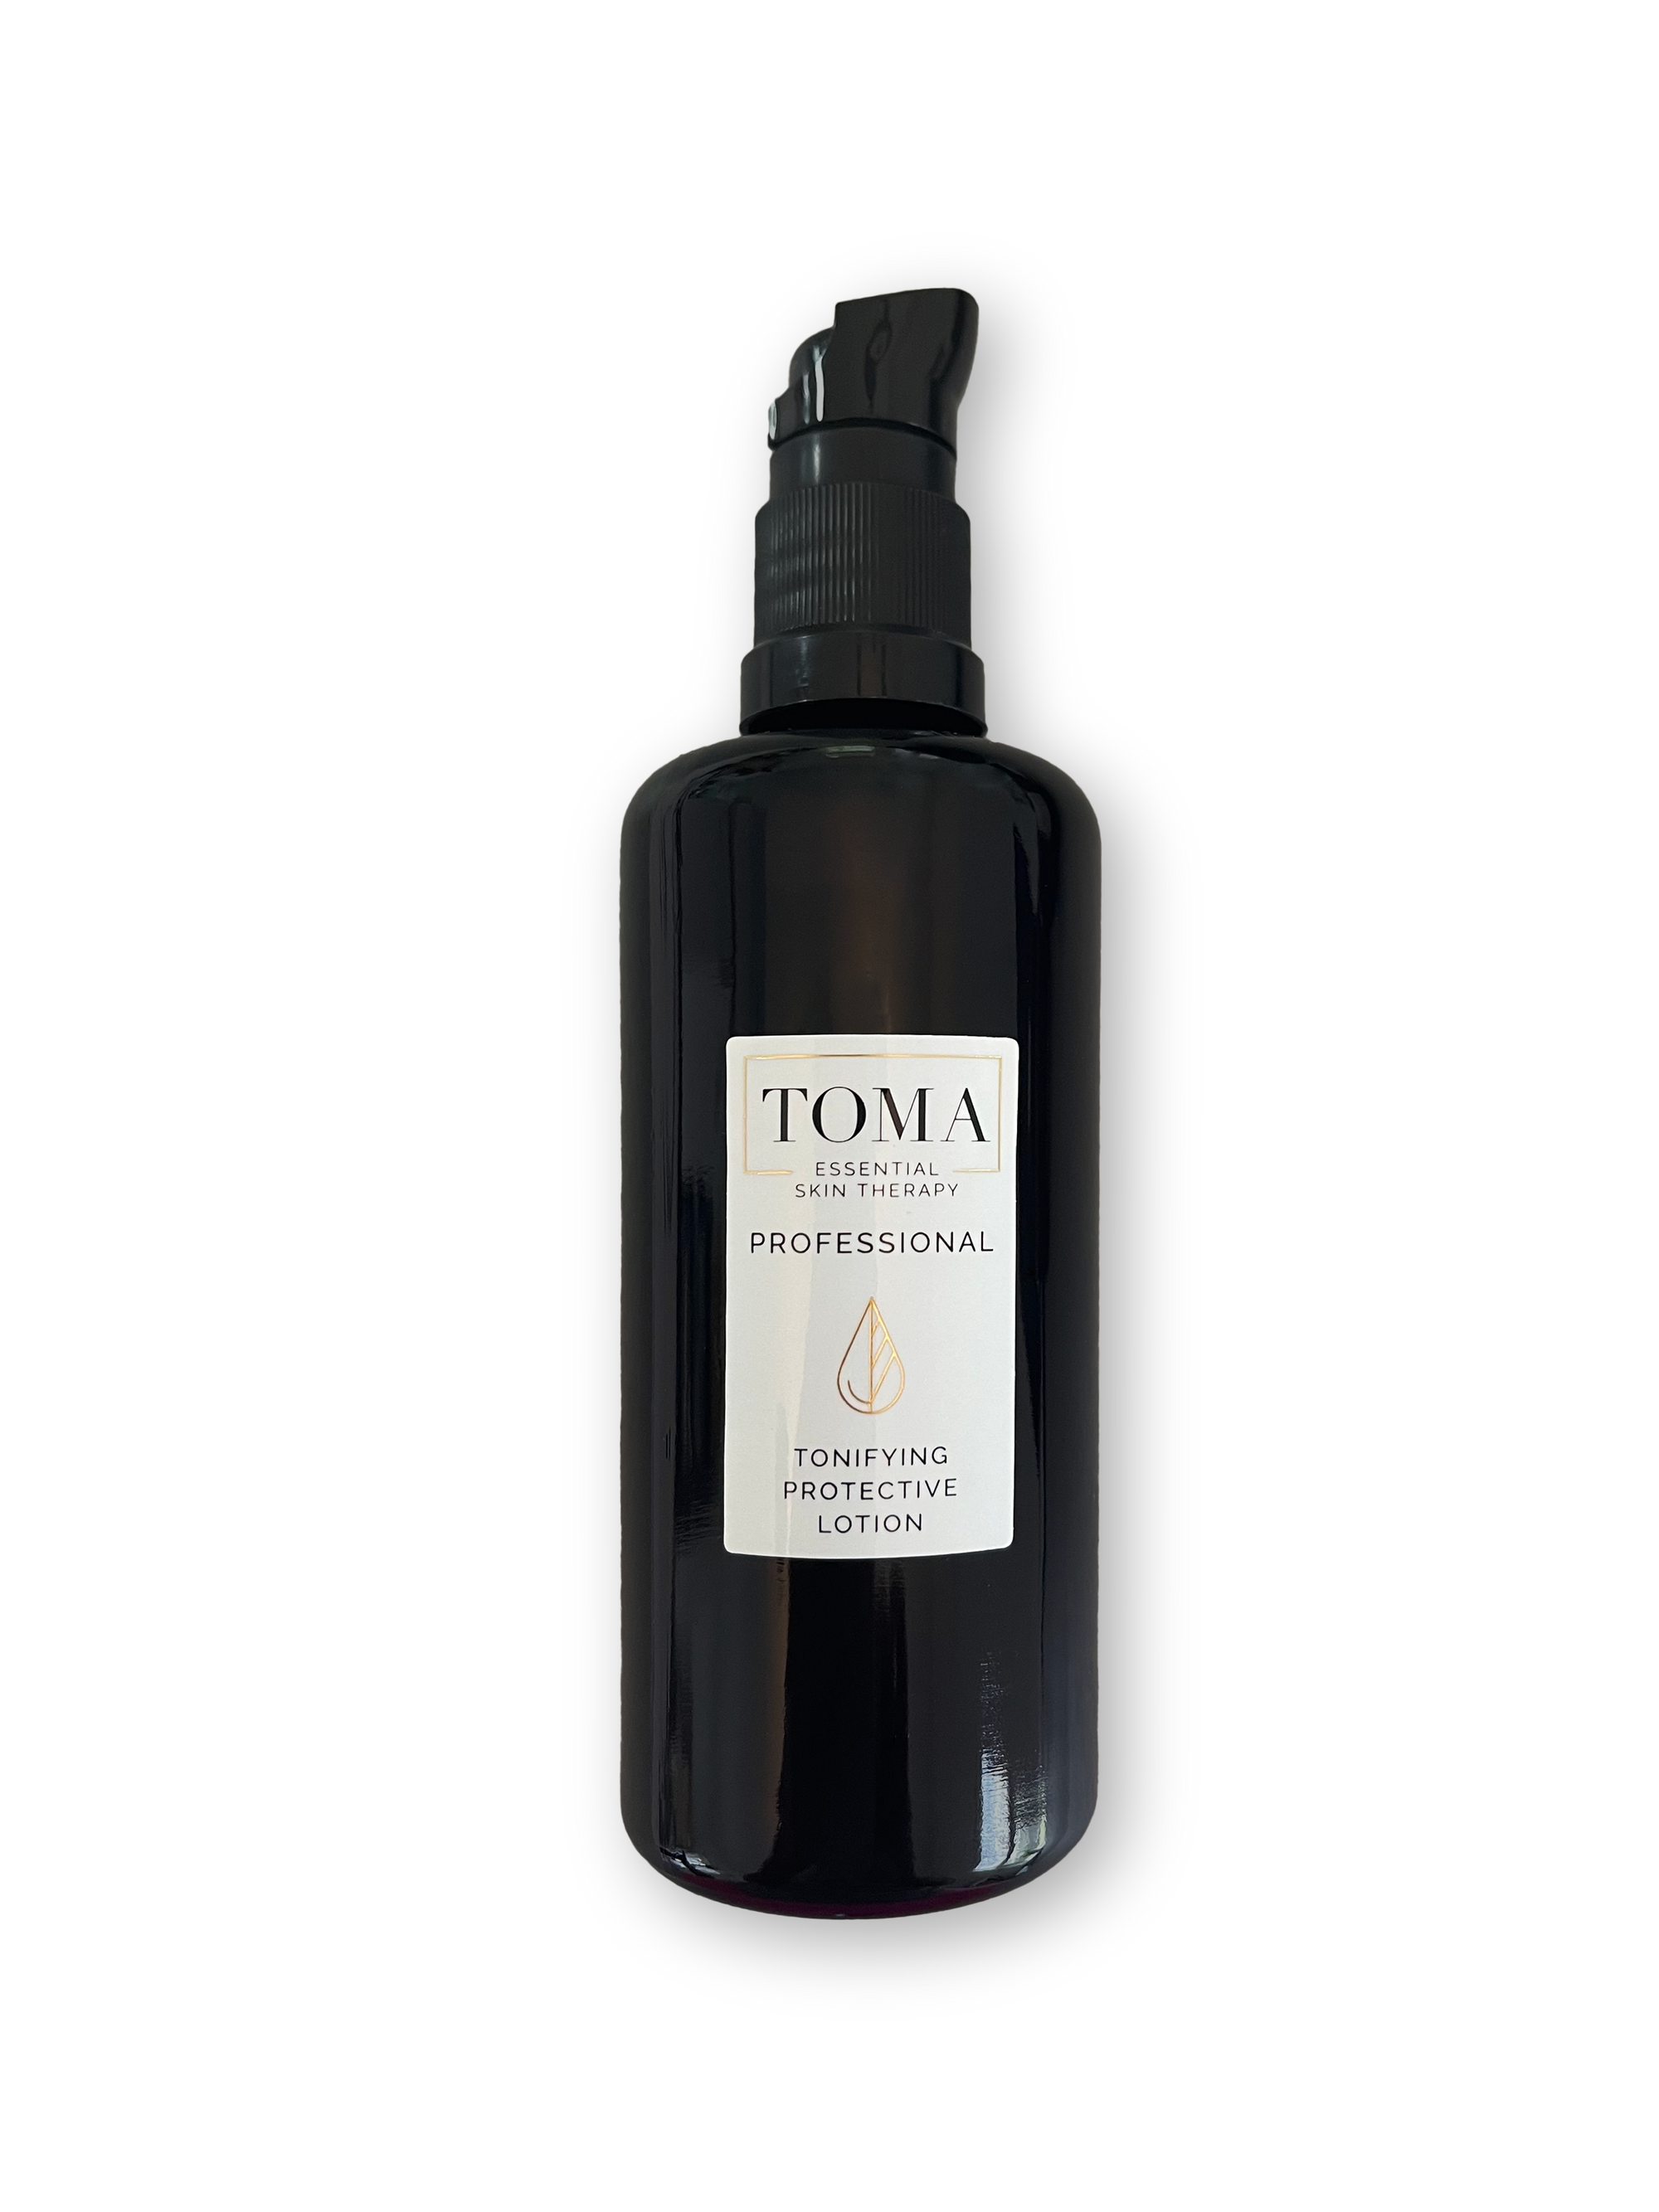 Tonifying Protective Lotion - PRO